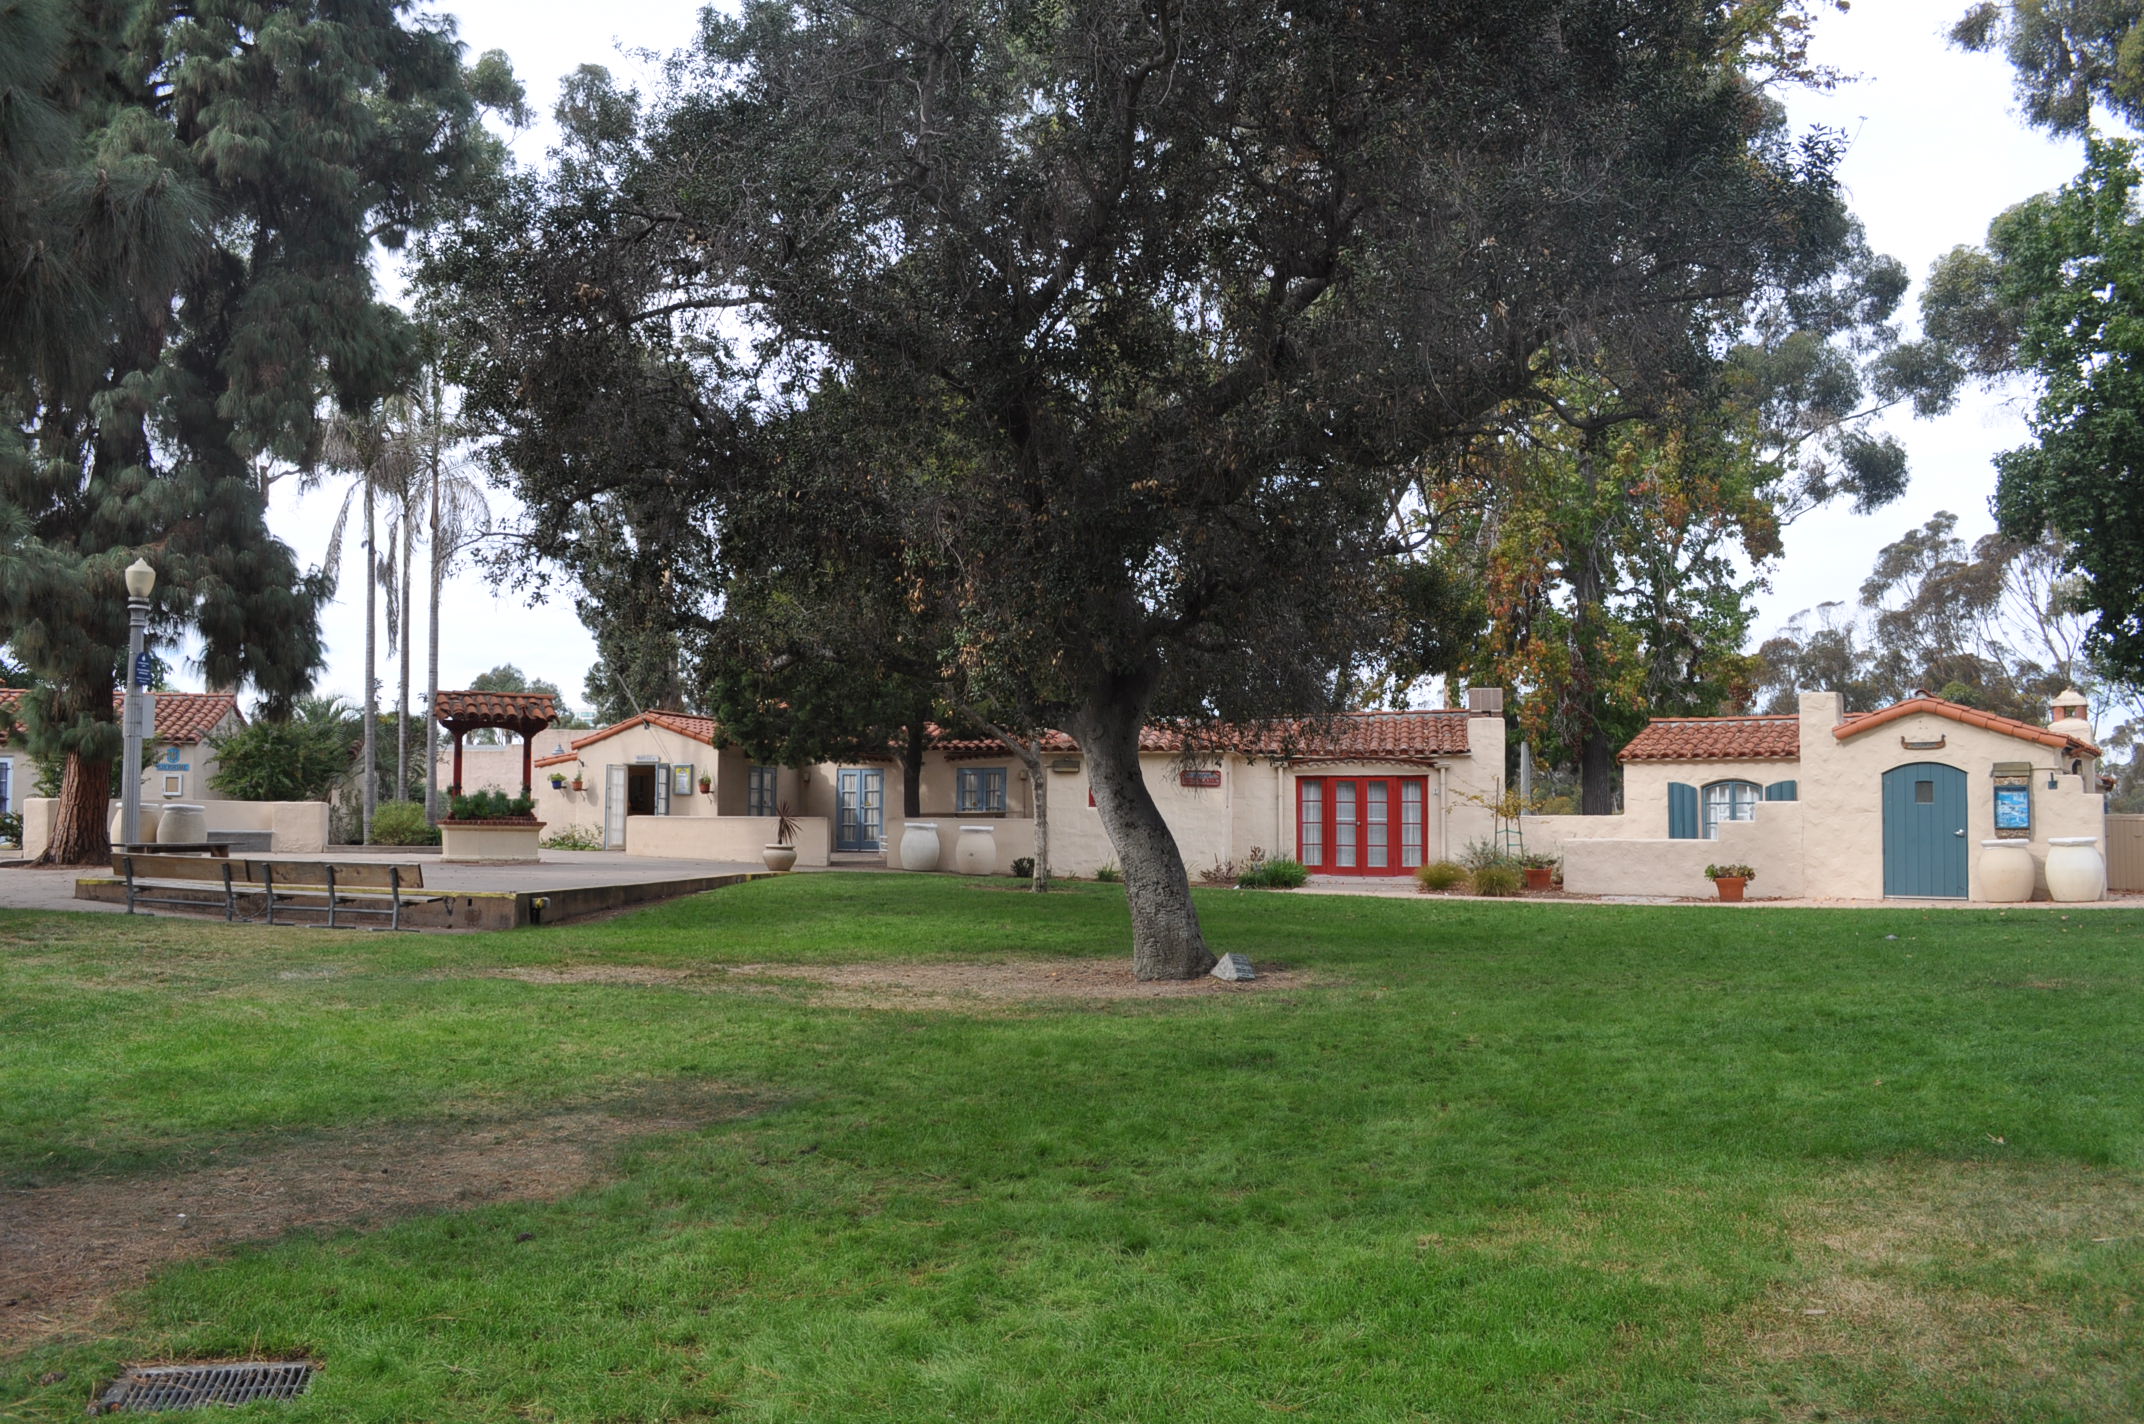 More International Cottages Coming To Balboa Park Nbc 7 San Diego